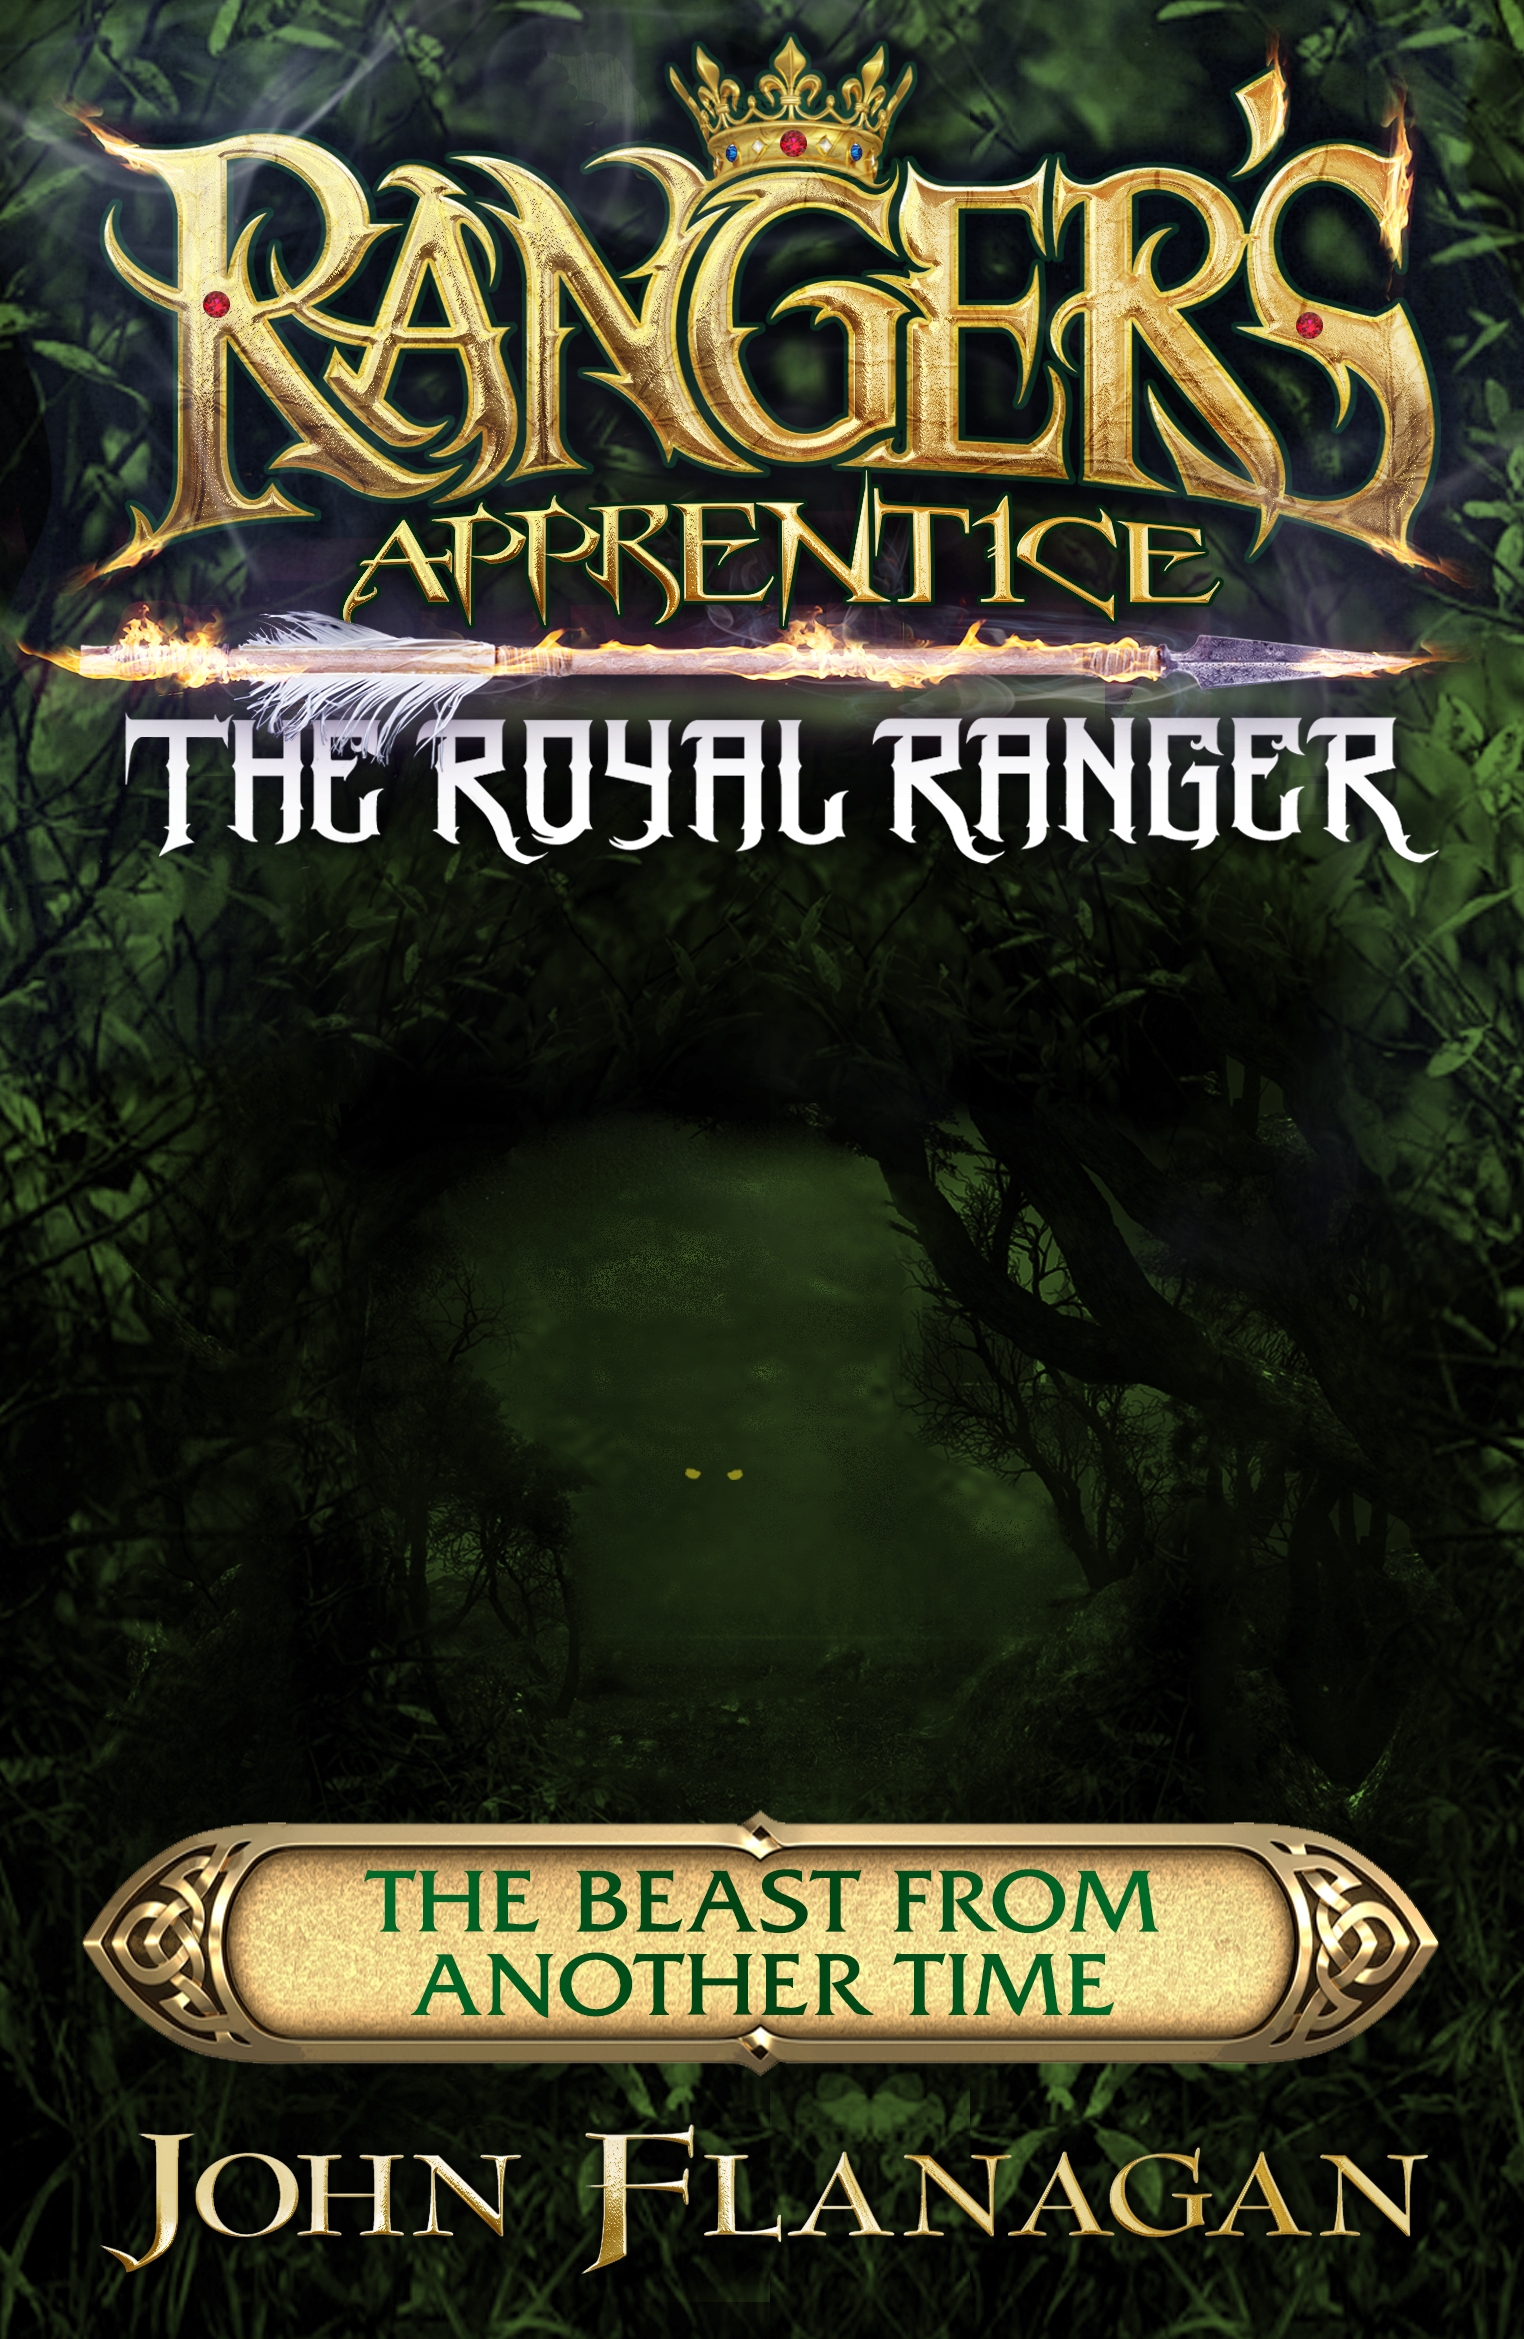 Ranger's Apprentice The Royal Ranger: The Beast from Another Time by